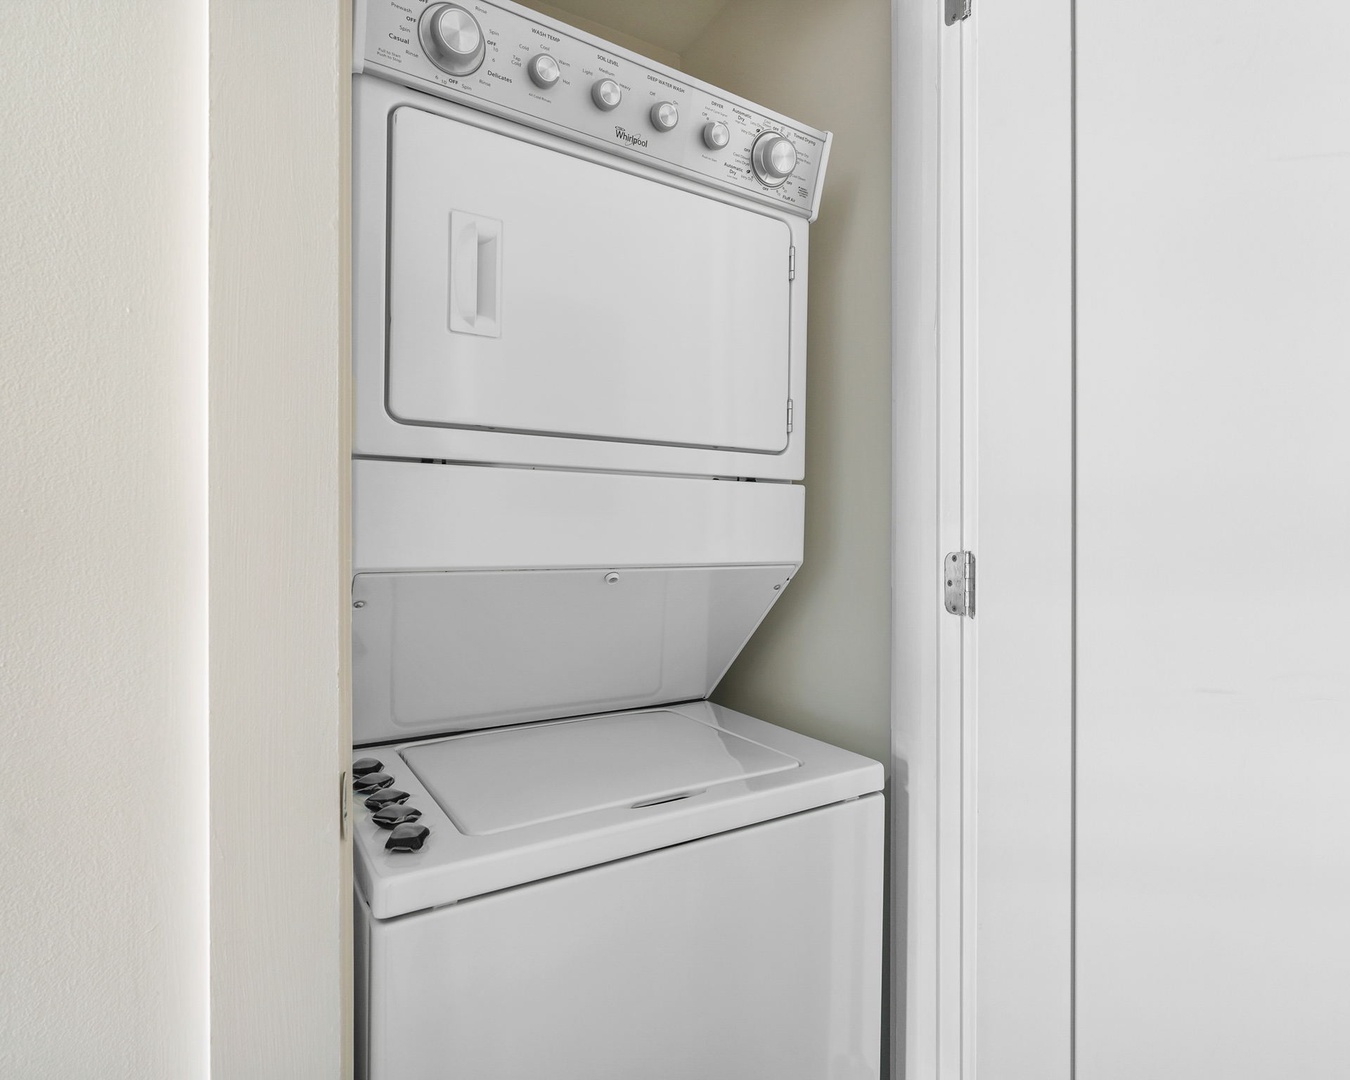 Enjoy clean clothes with the in-unit washer and dryer.